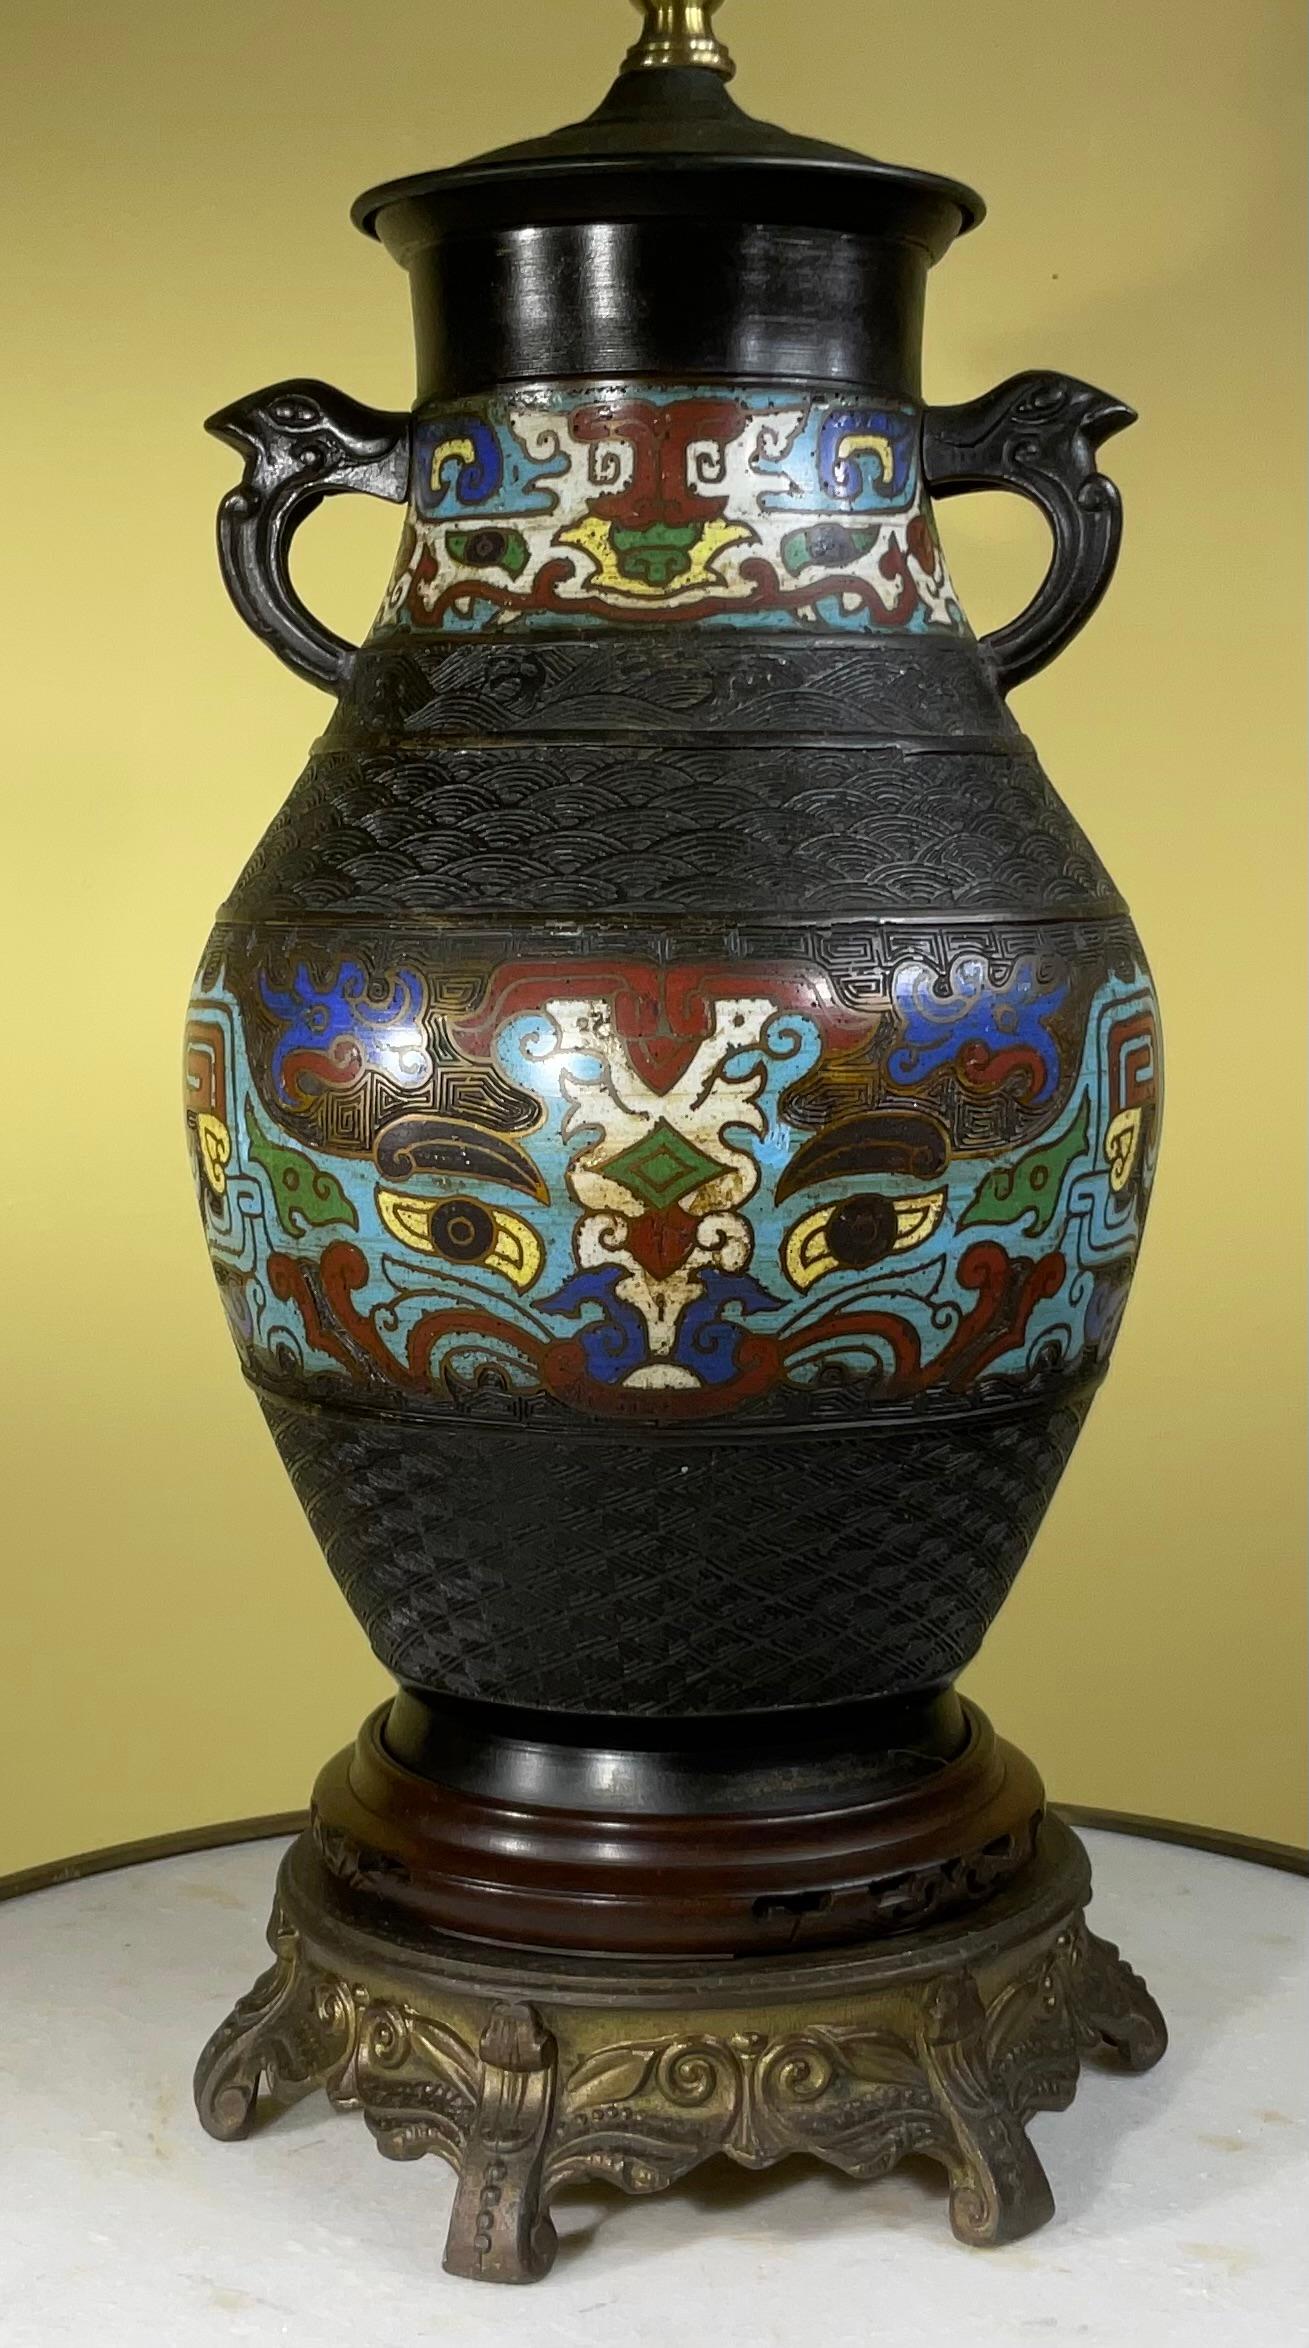 Antique Japanese Cloisonné Lamp, circa 1910, with blue, wine white and turquoise color enamel inlay on bronze vase, mounted on a round hand carved wood base with a secondary gold color metal base, newly electrified and ready to use.